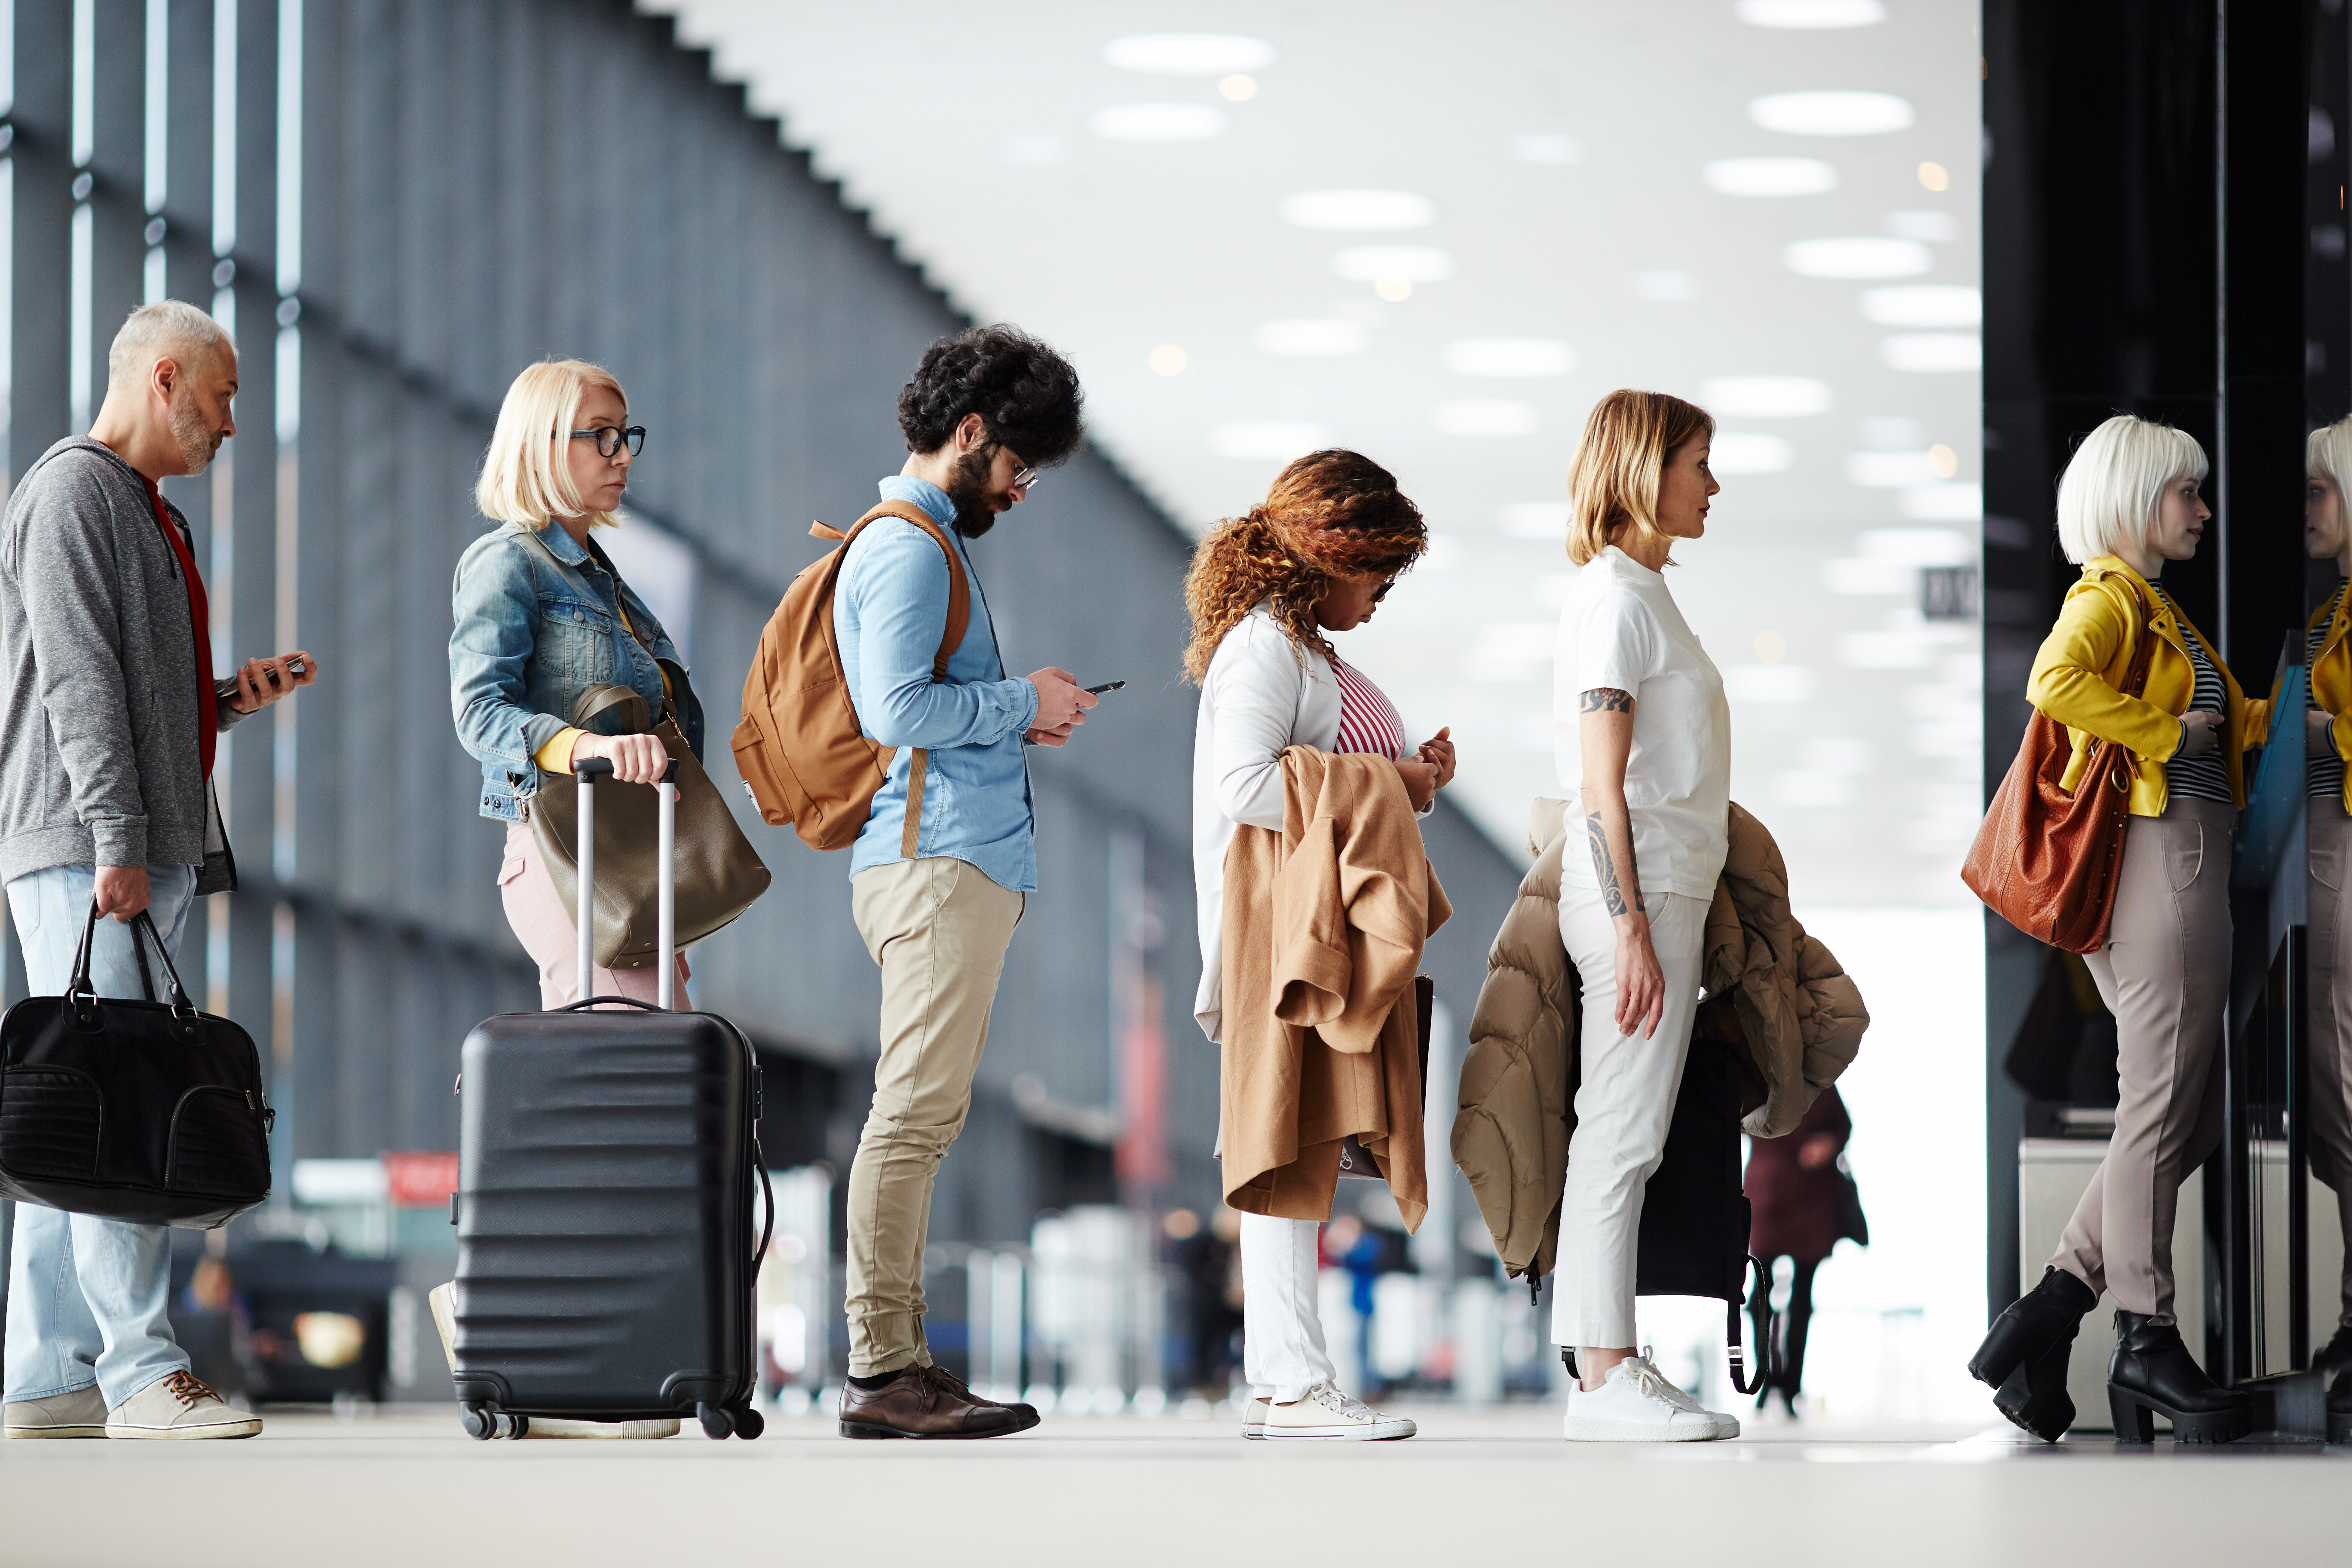 People standing in line at an airport | Source: Shutterstock